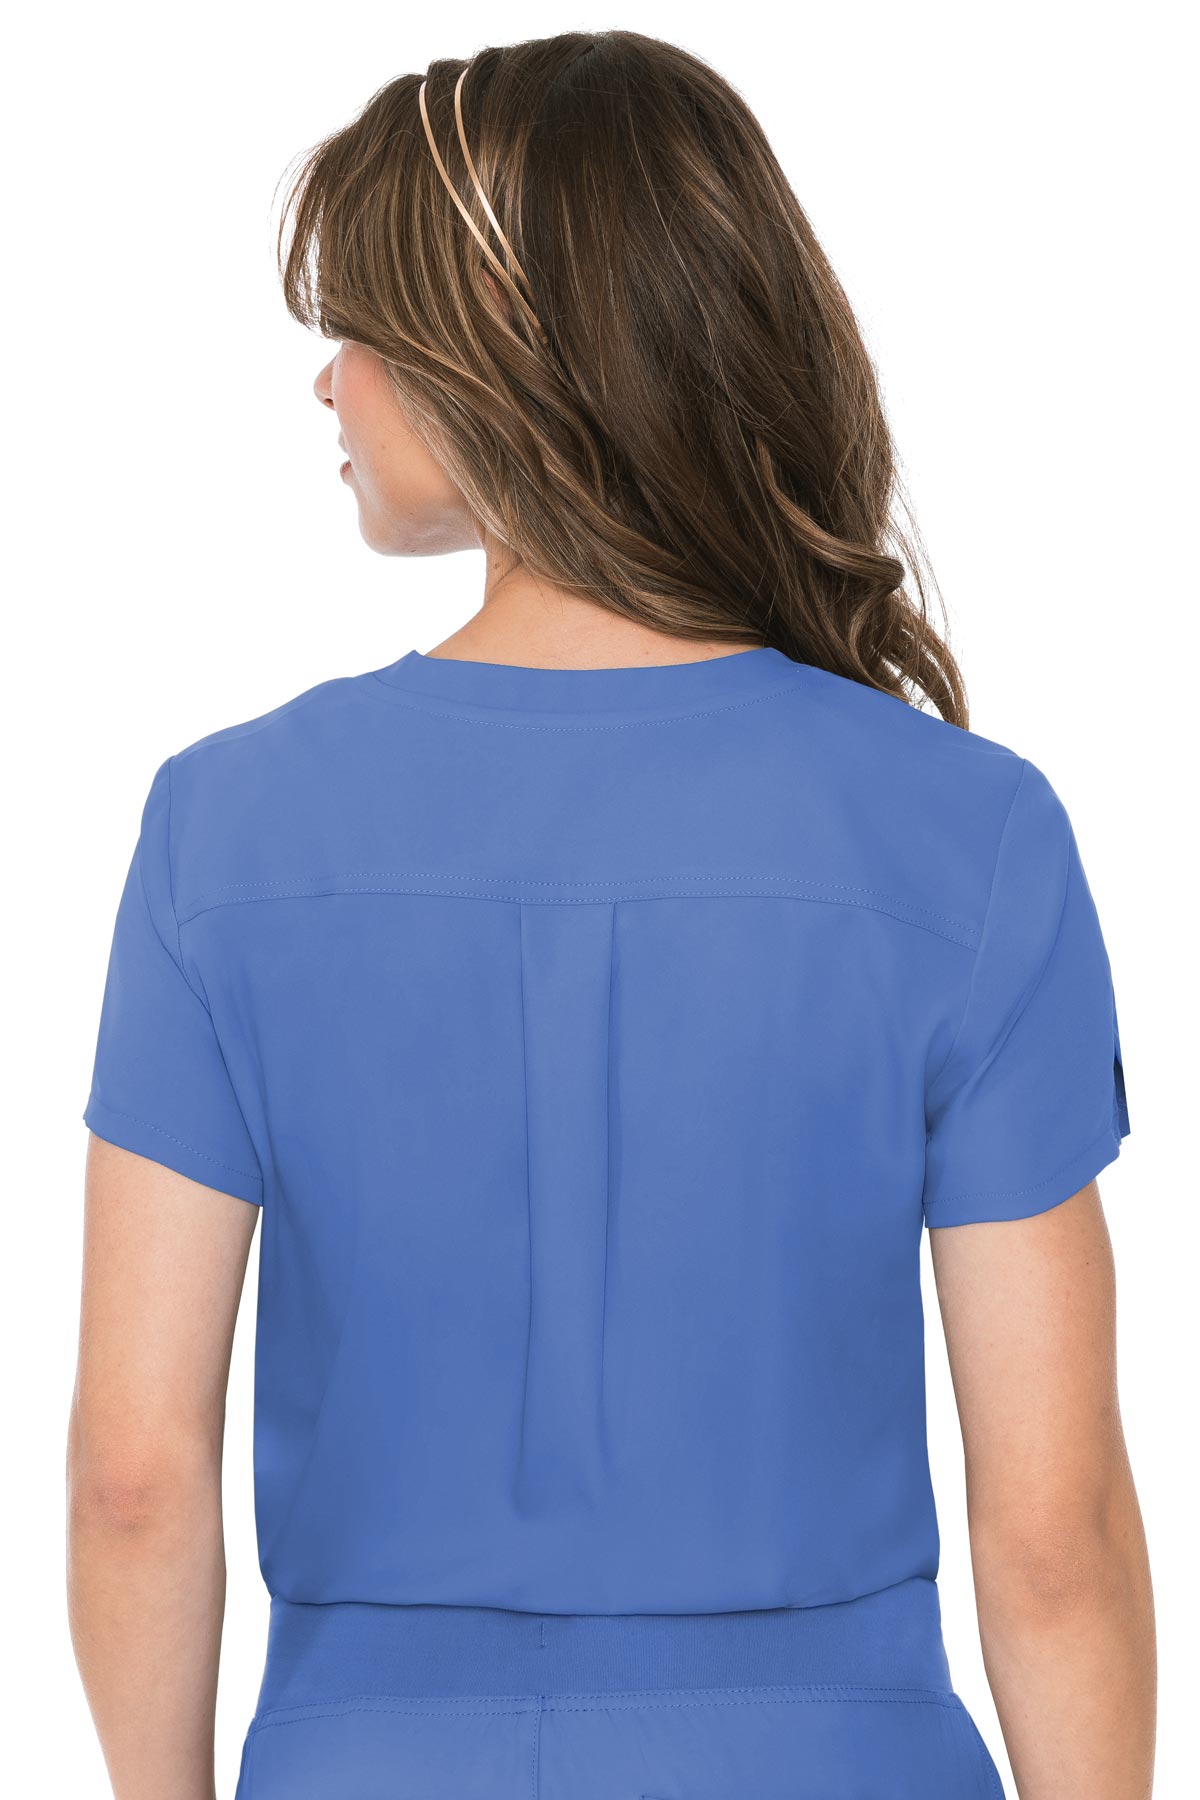 Med Couture 2432 Insight 1 Pocket Women's Tuck-In Top Ceil Back